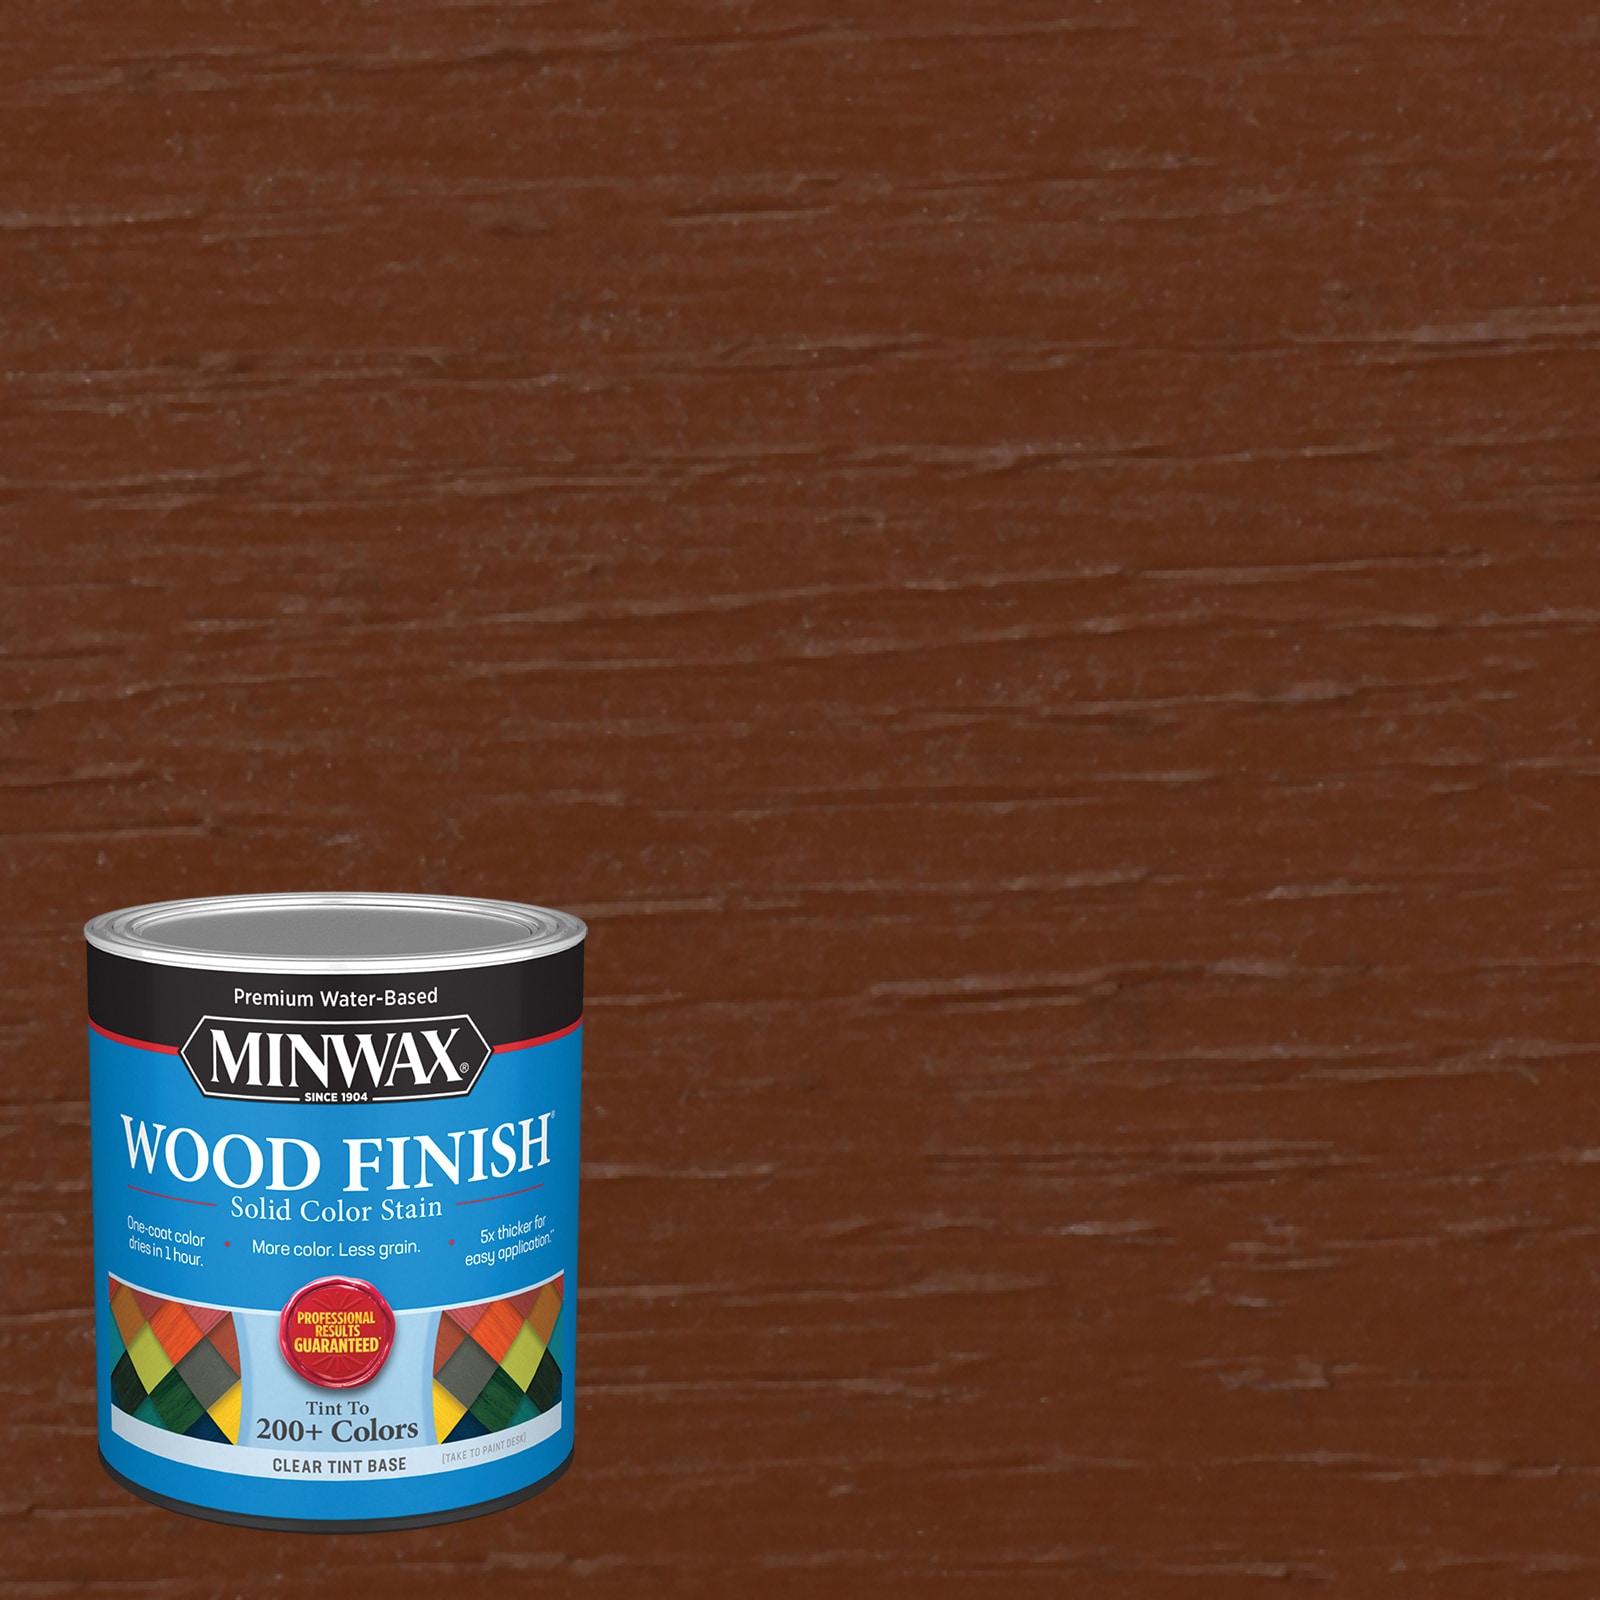 Minwax Wood Finish Water-Based Crimson Mw1147 Solid Interior Stain